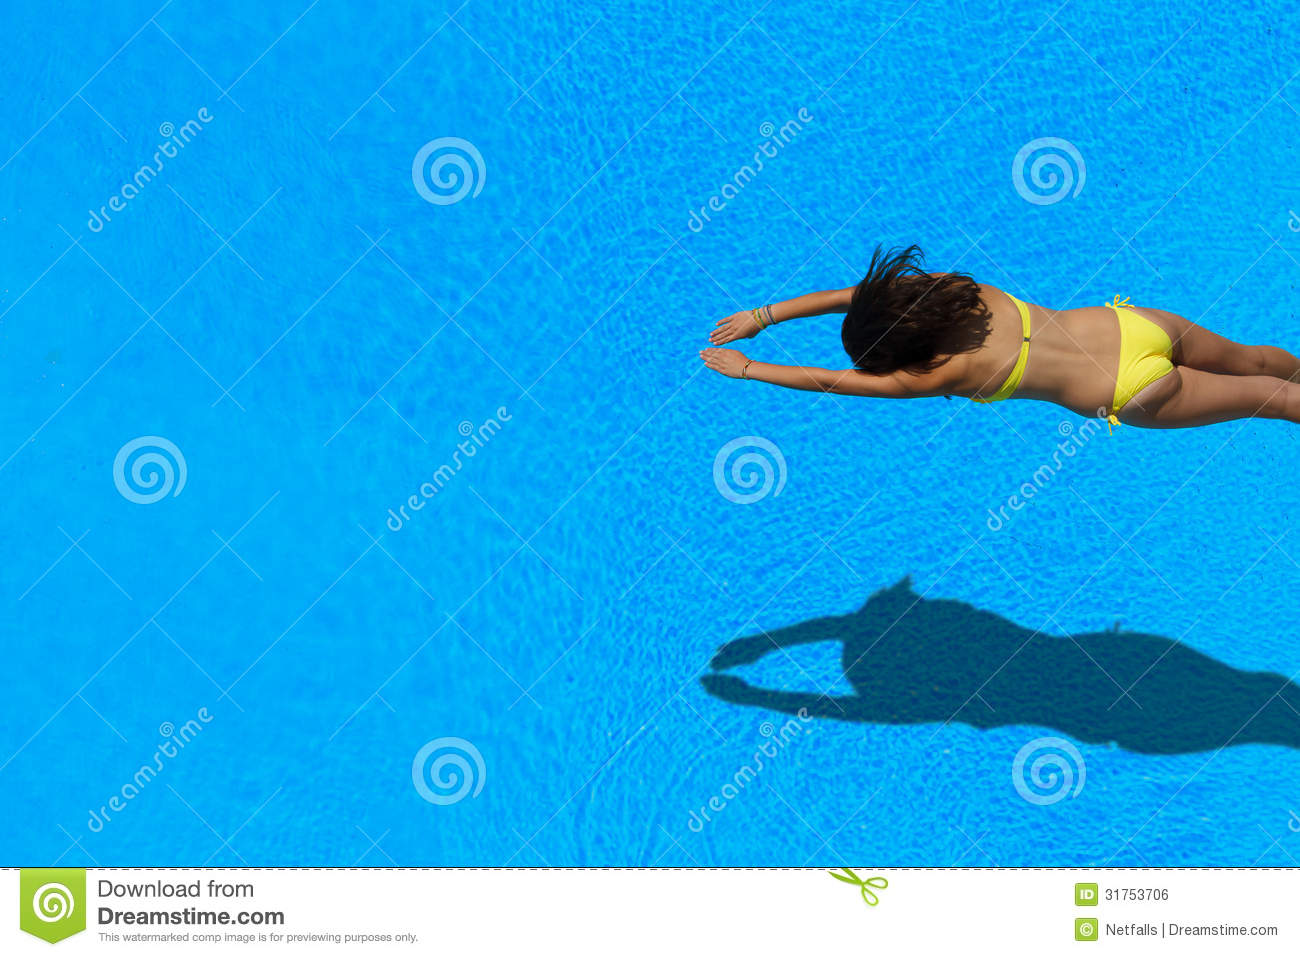 Girl Diving In The Swimming Pool Royalty Free Stock Image   Image    